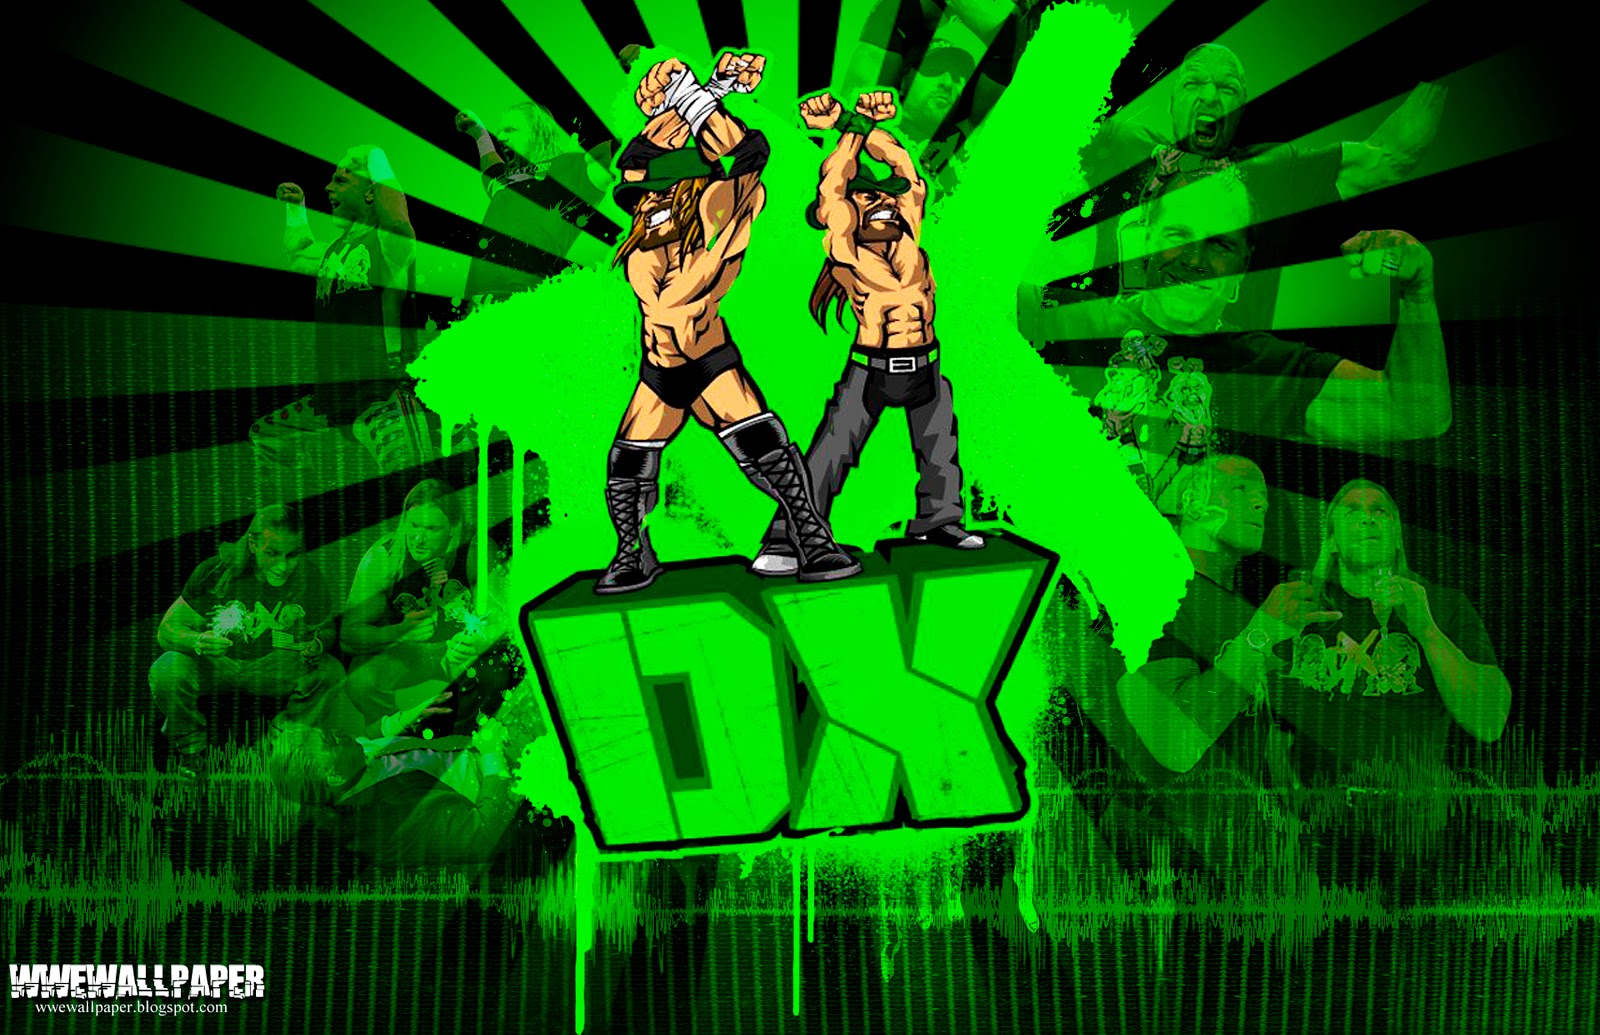 triple h dx wallpapers 2022